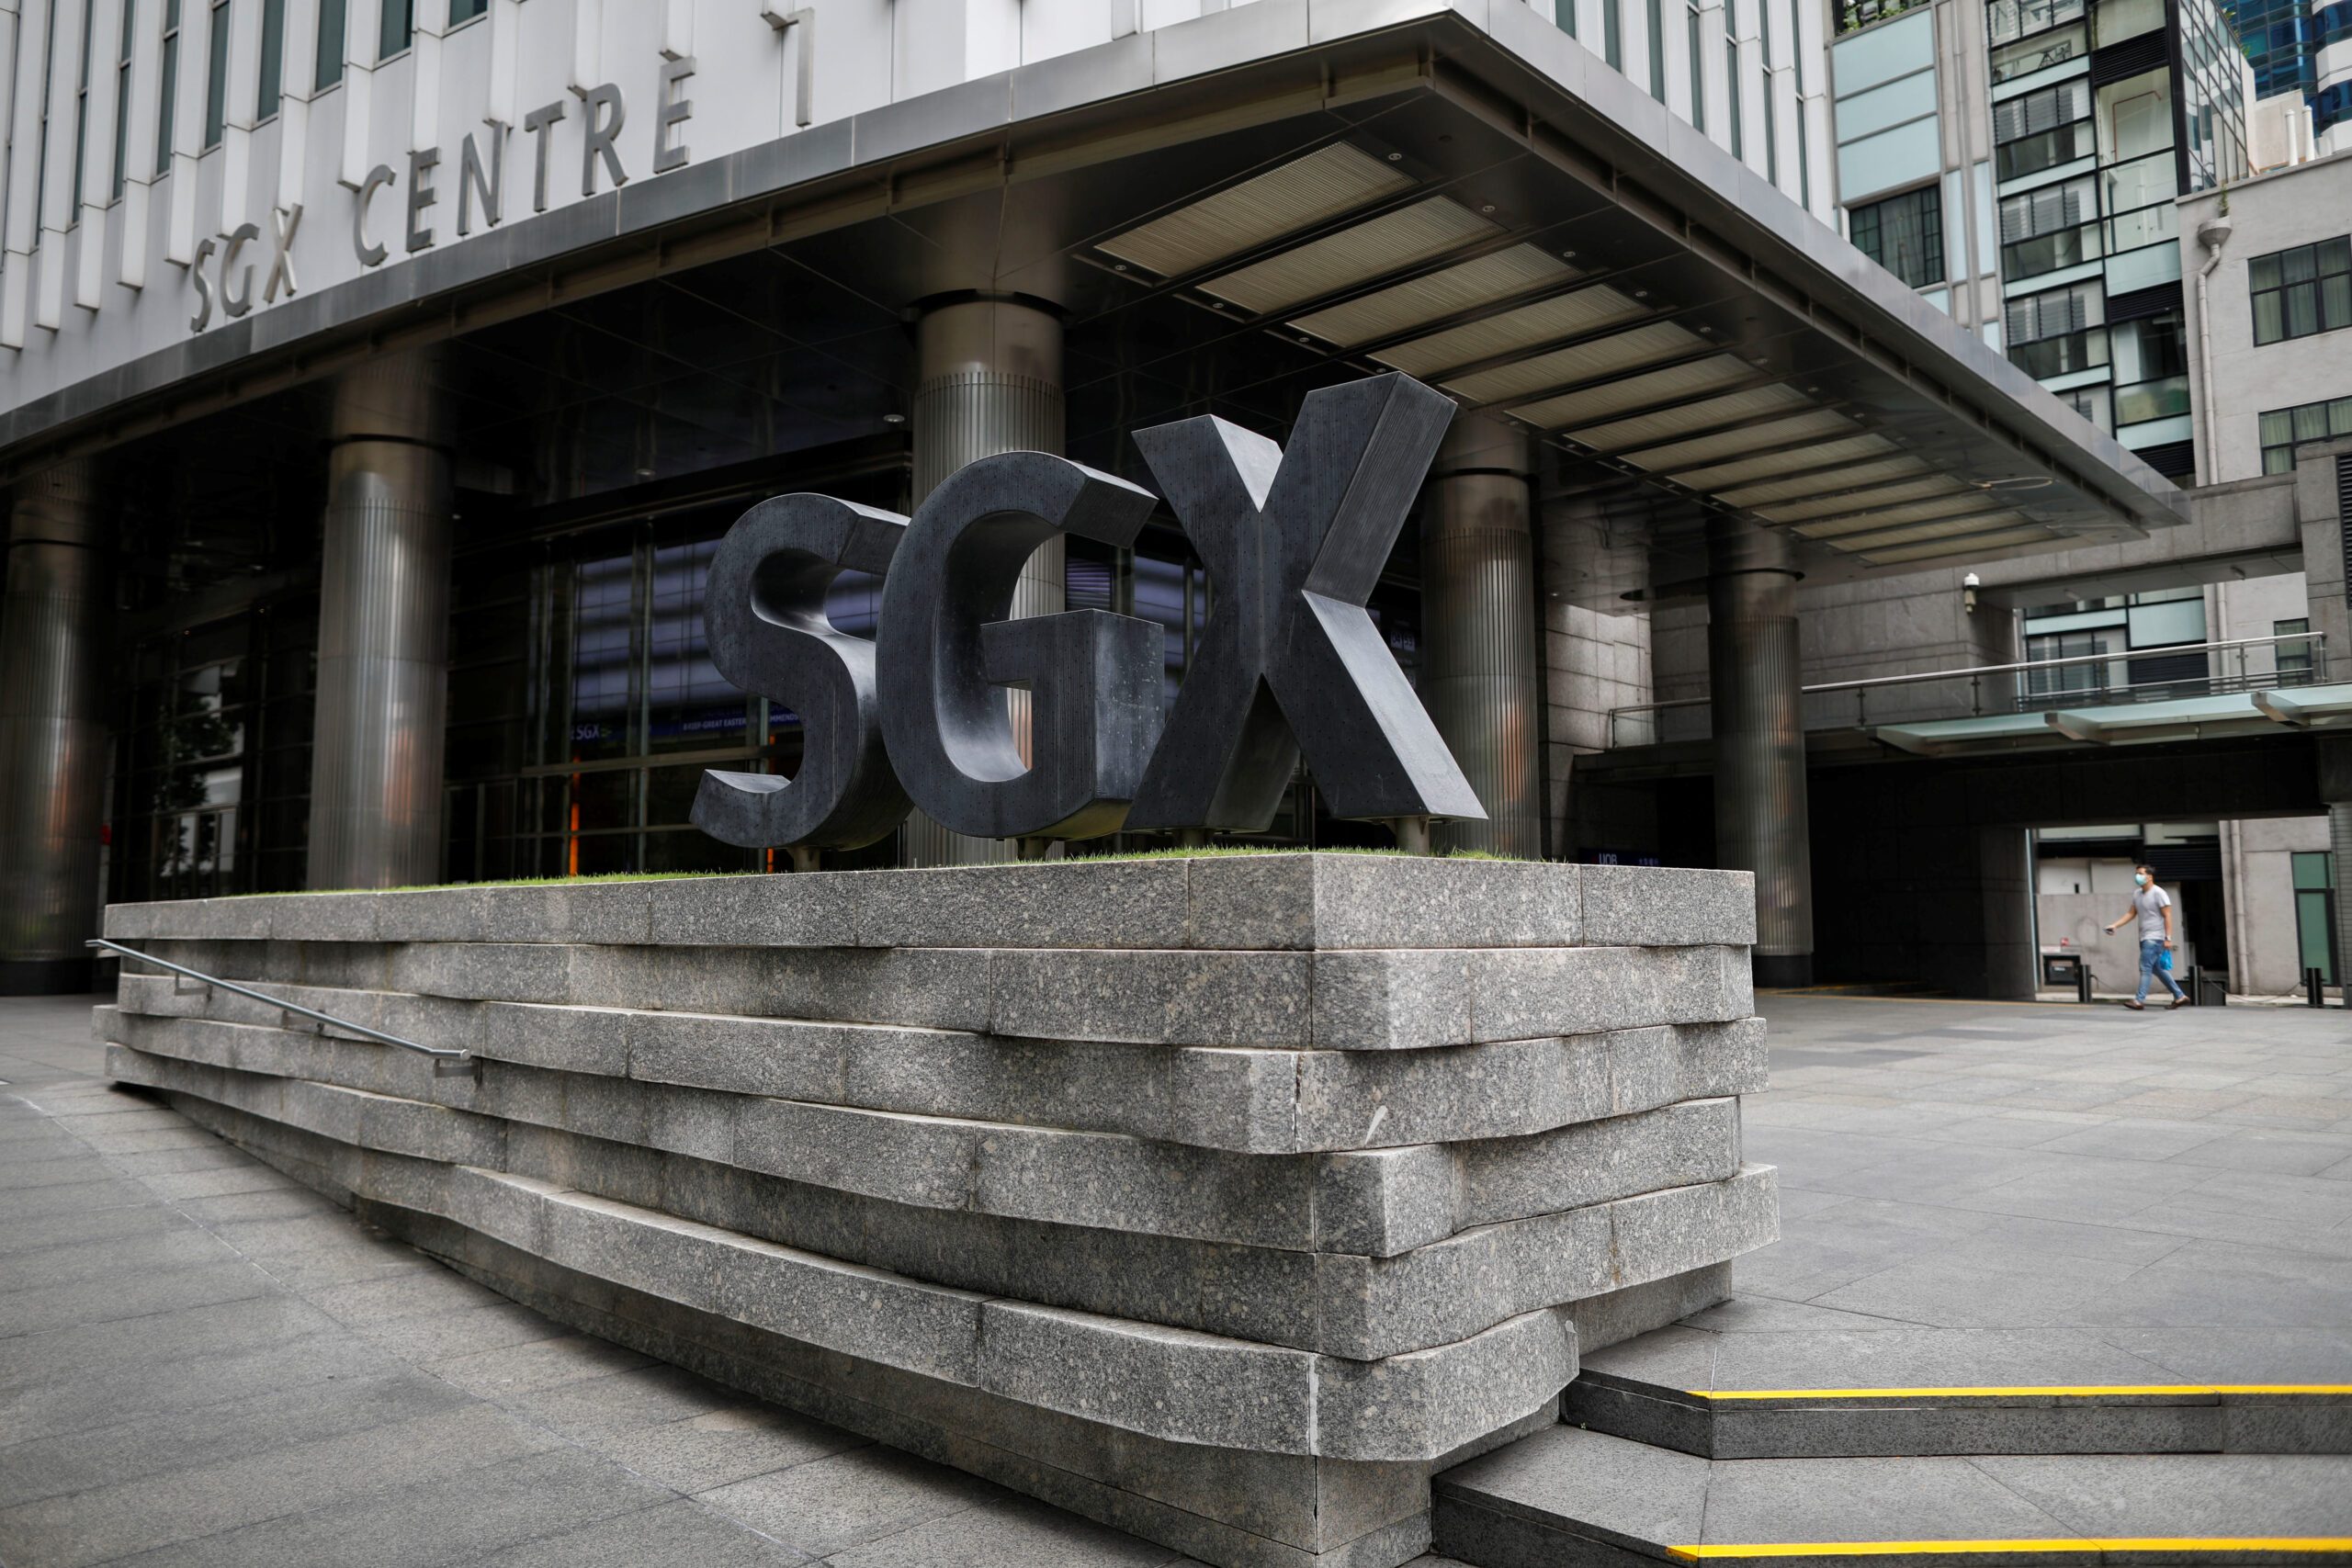 SGX's CFO Ng Yao Loong to transition to role of equities head